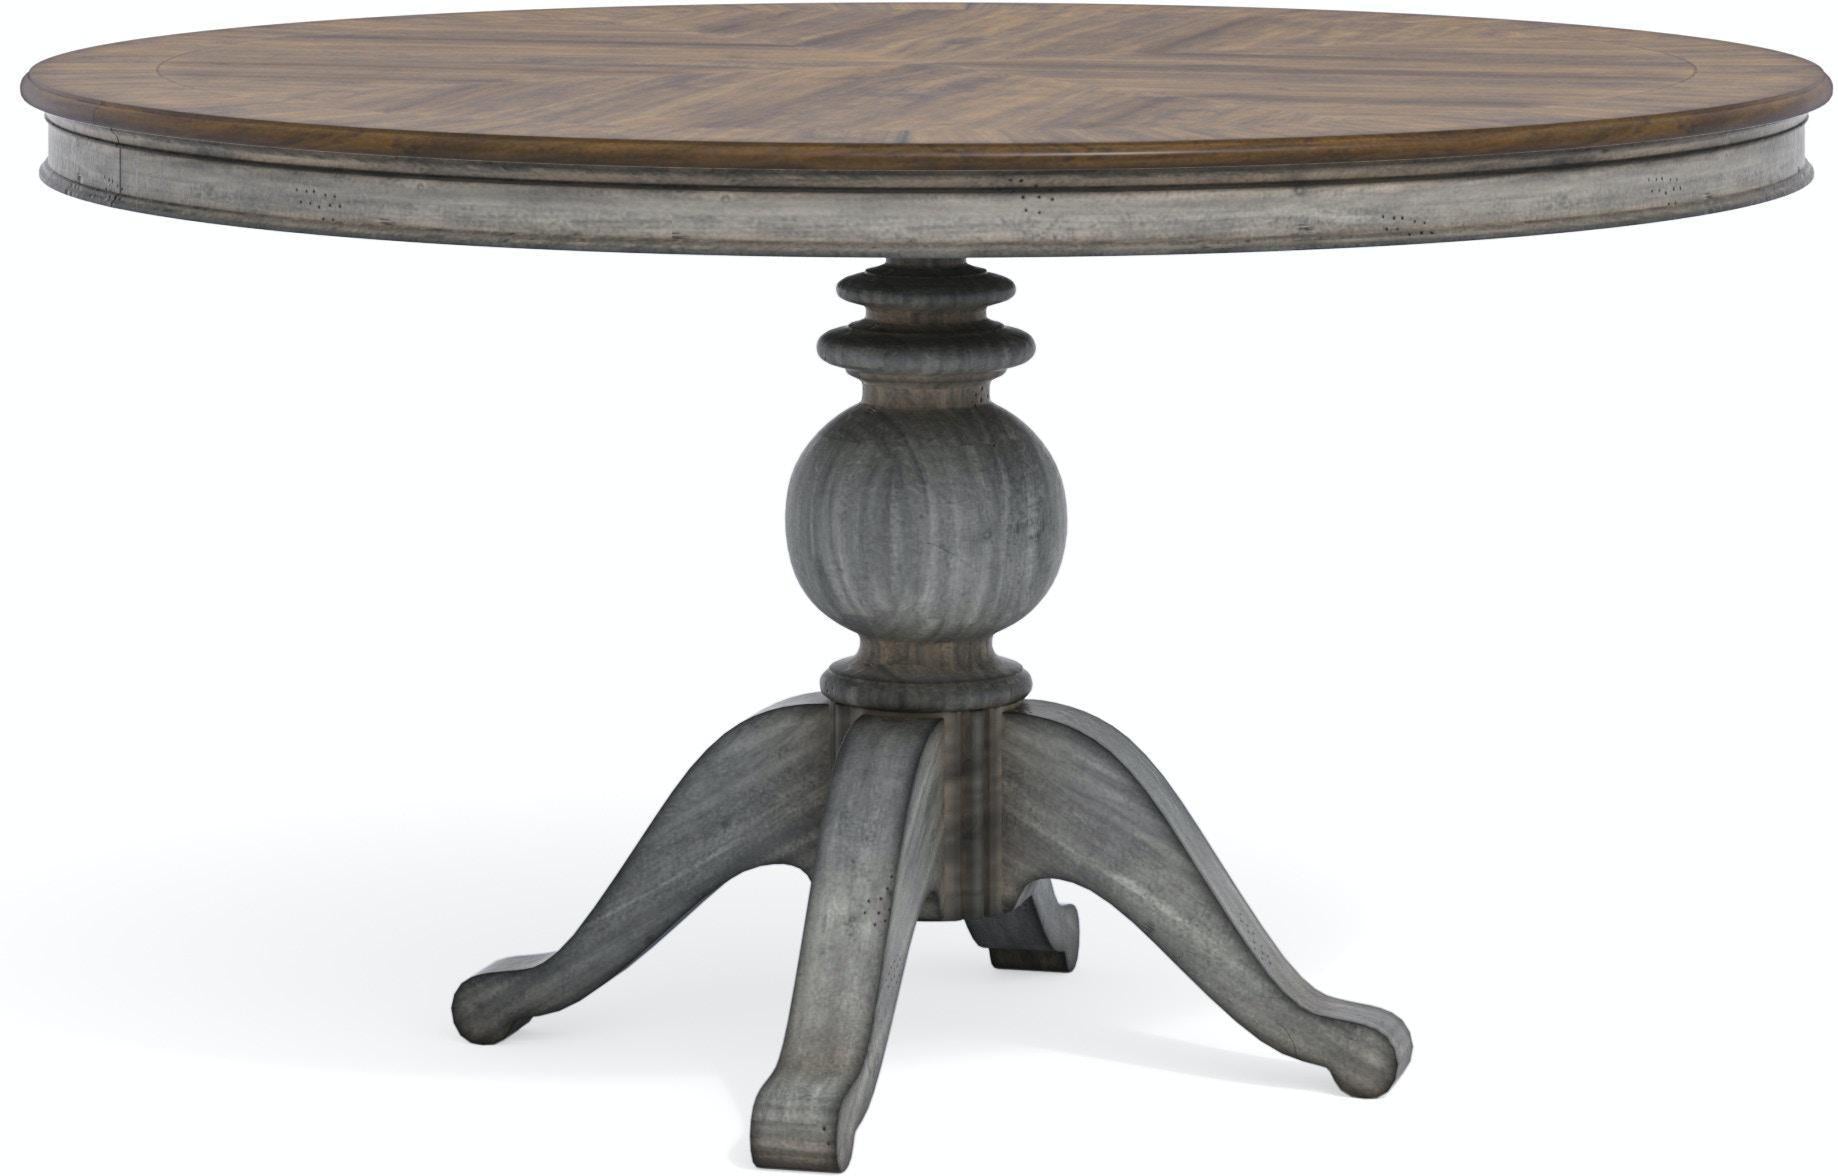 Flexsteel Wynwood Plymouth Round Pedestal Dining Table in Two-Toned